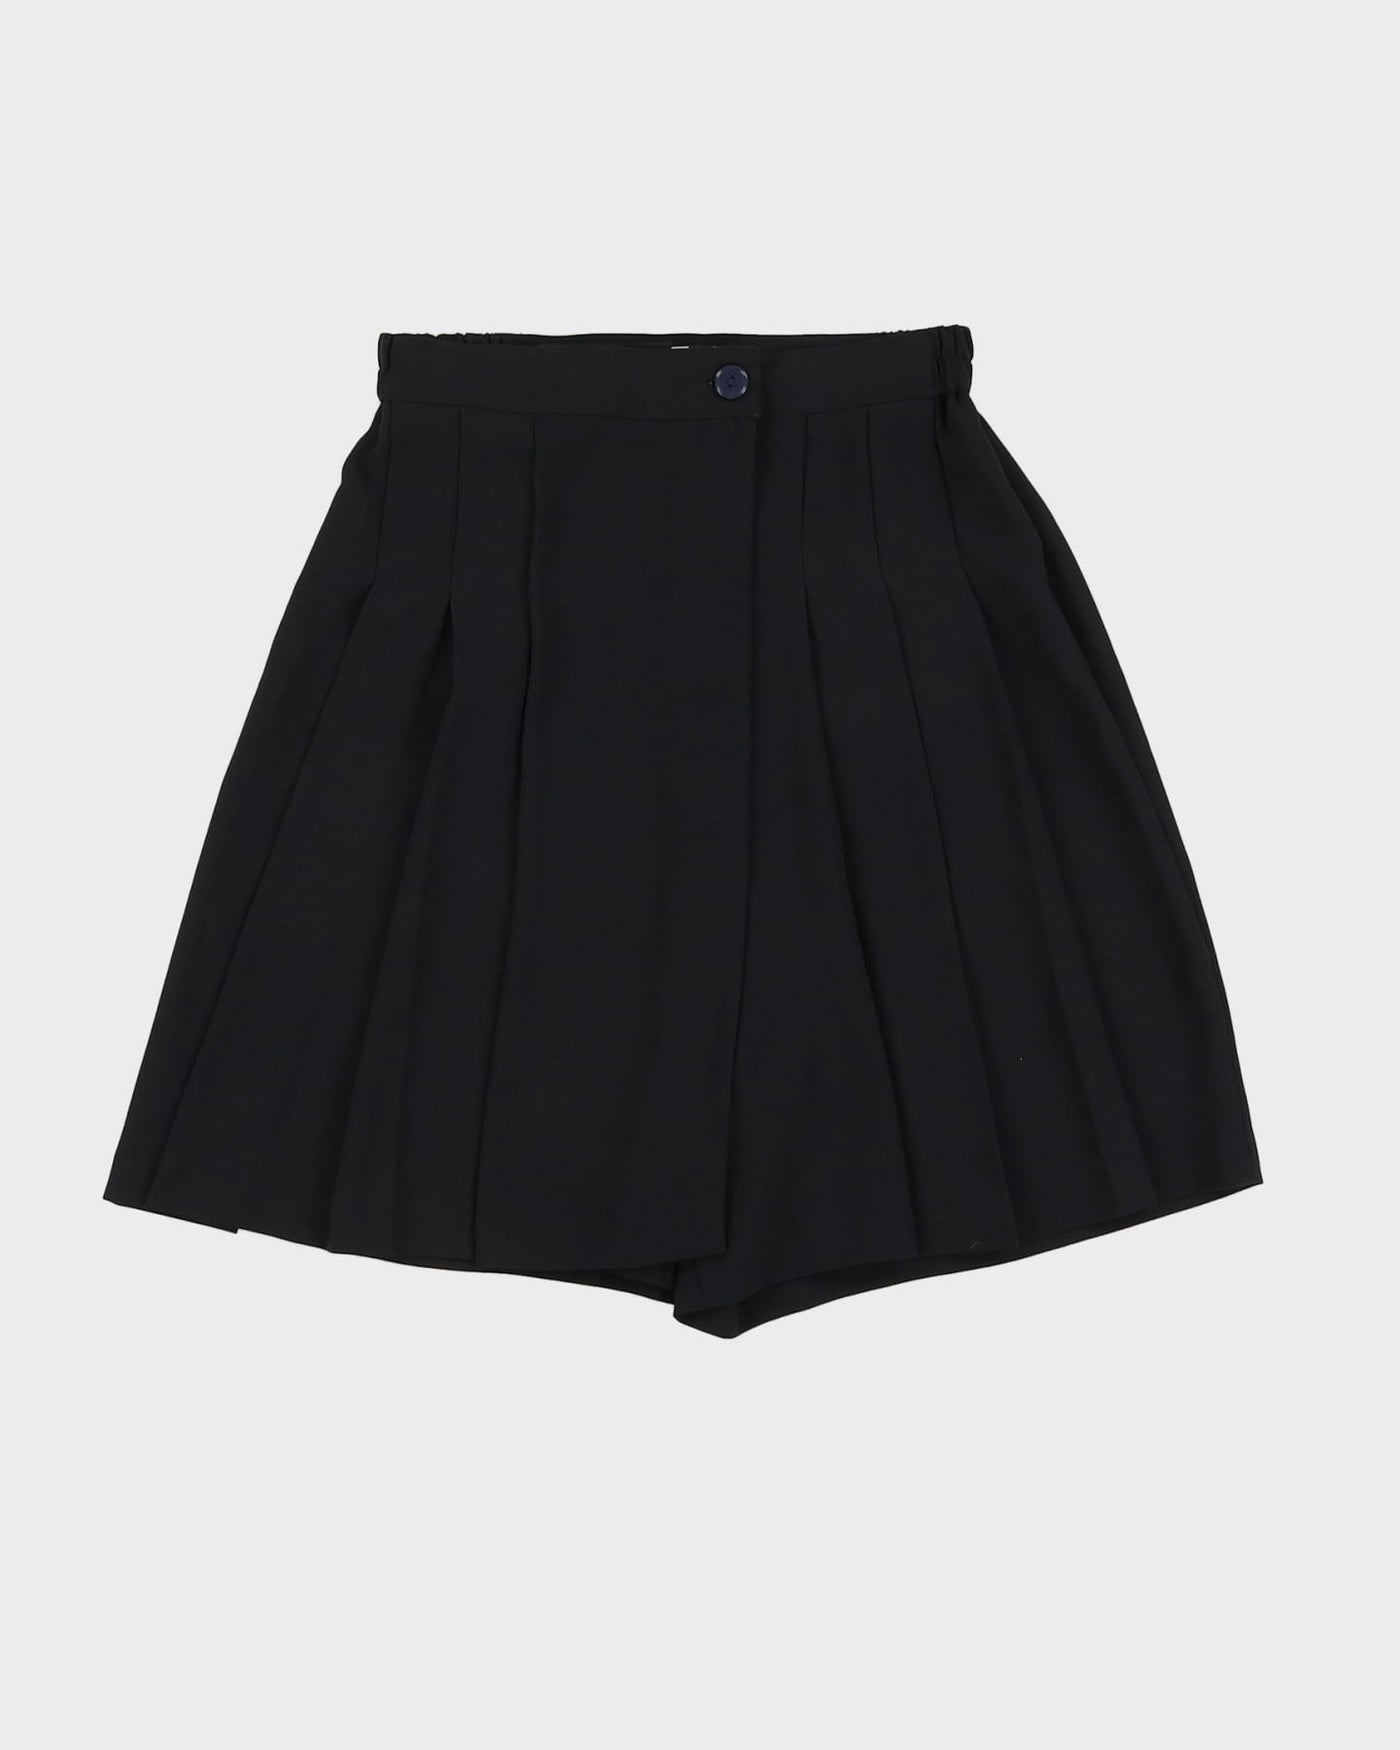 Black Pleated High Waisted Shorts - S